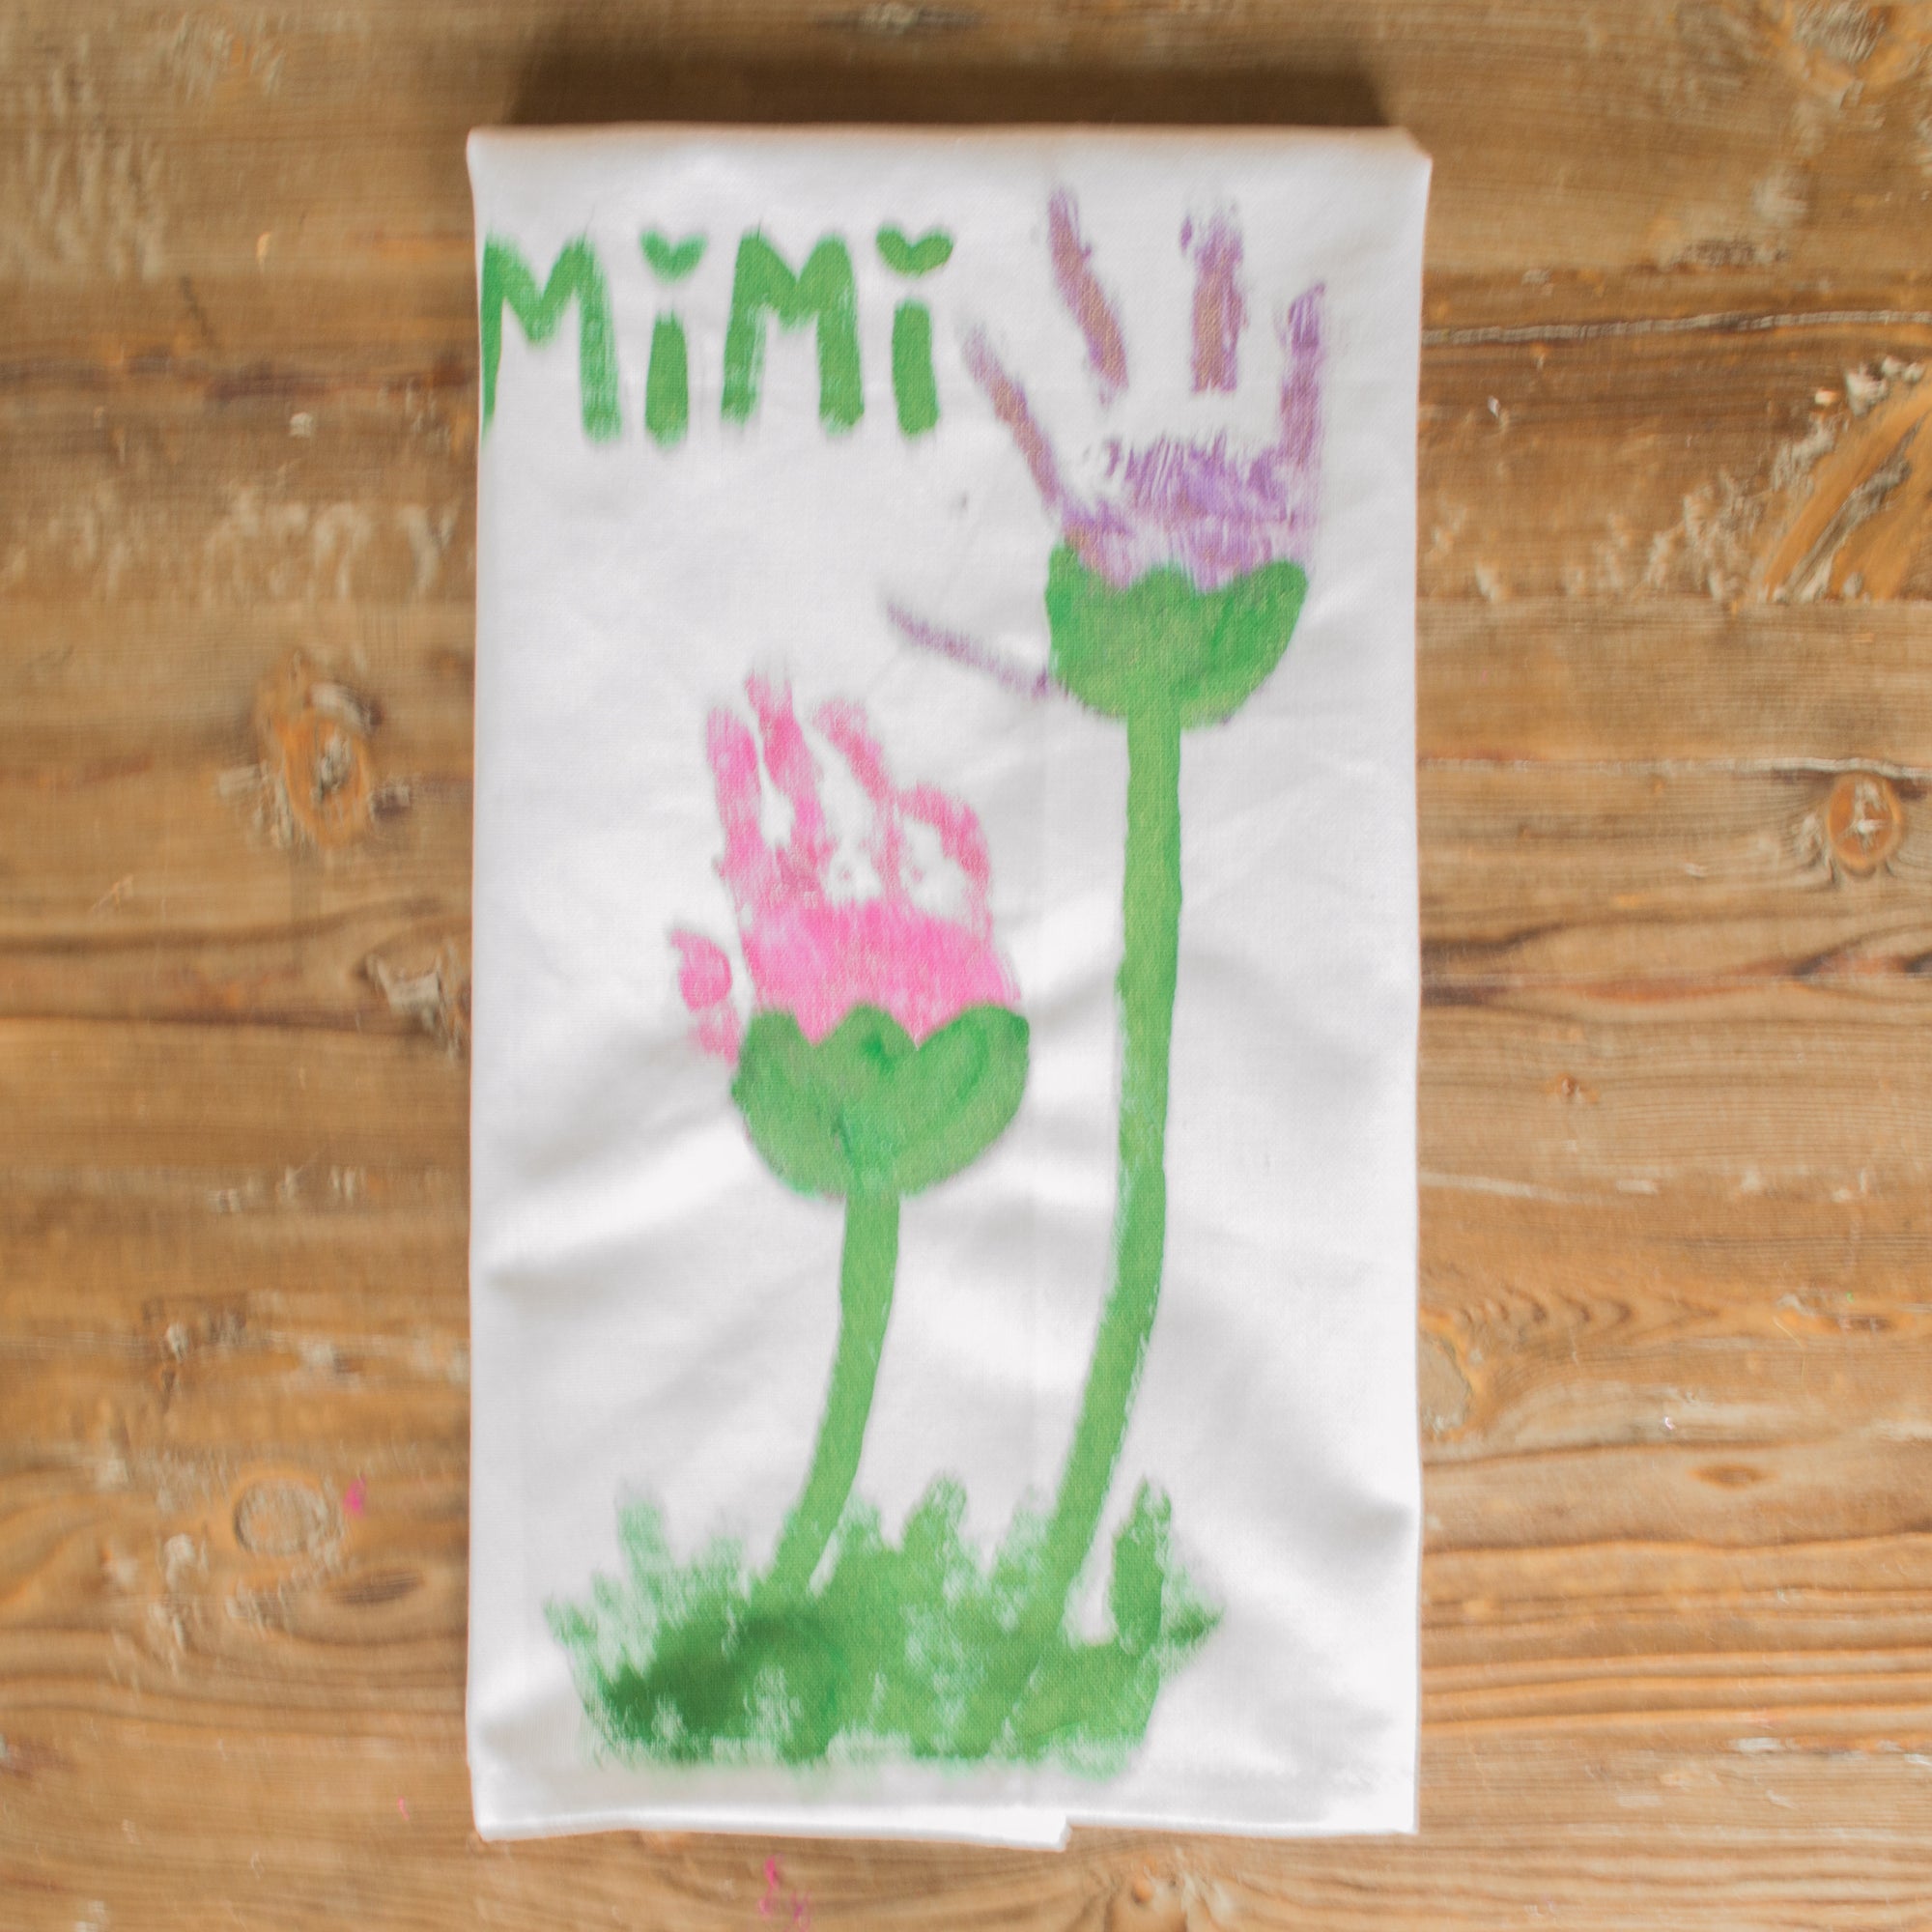 Crafts For The Not So Crafty: Painting Handprint Towel